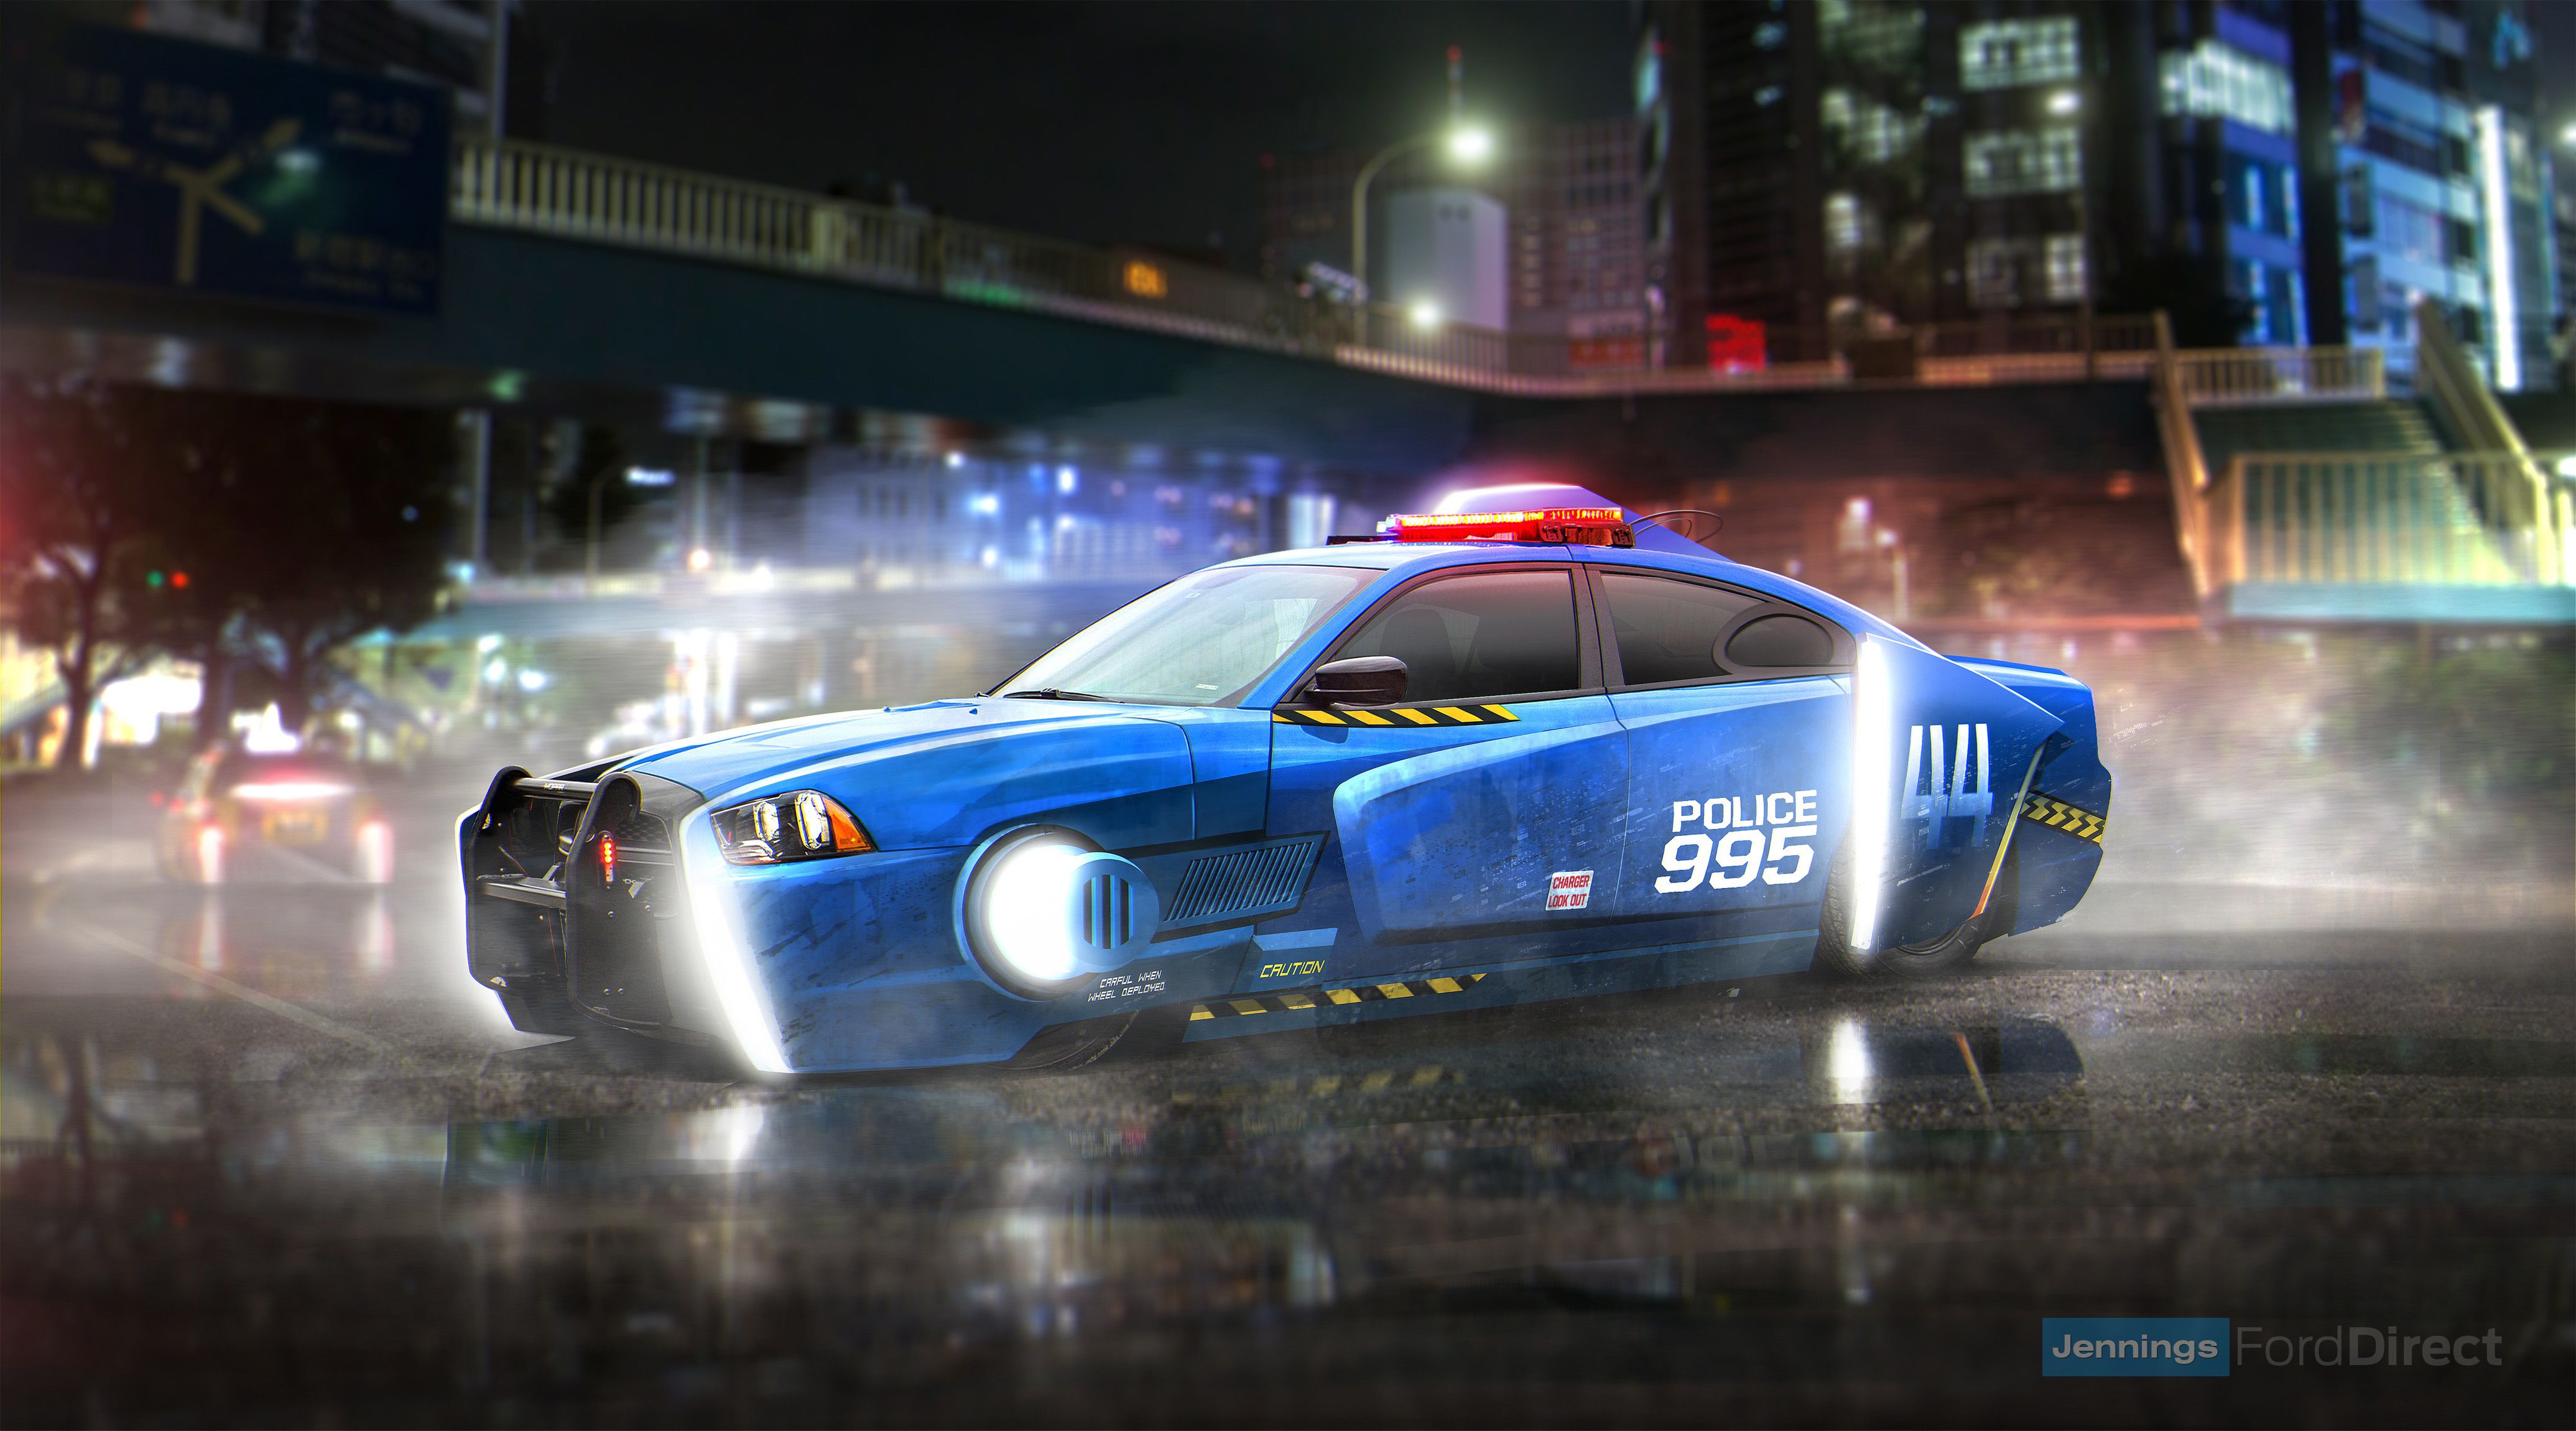 Blade Runner Spinner Dodge Charger Police Car, HD Cars, 4k Wallpaper, Image, Background, Photo and Picture